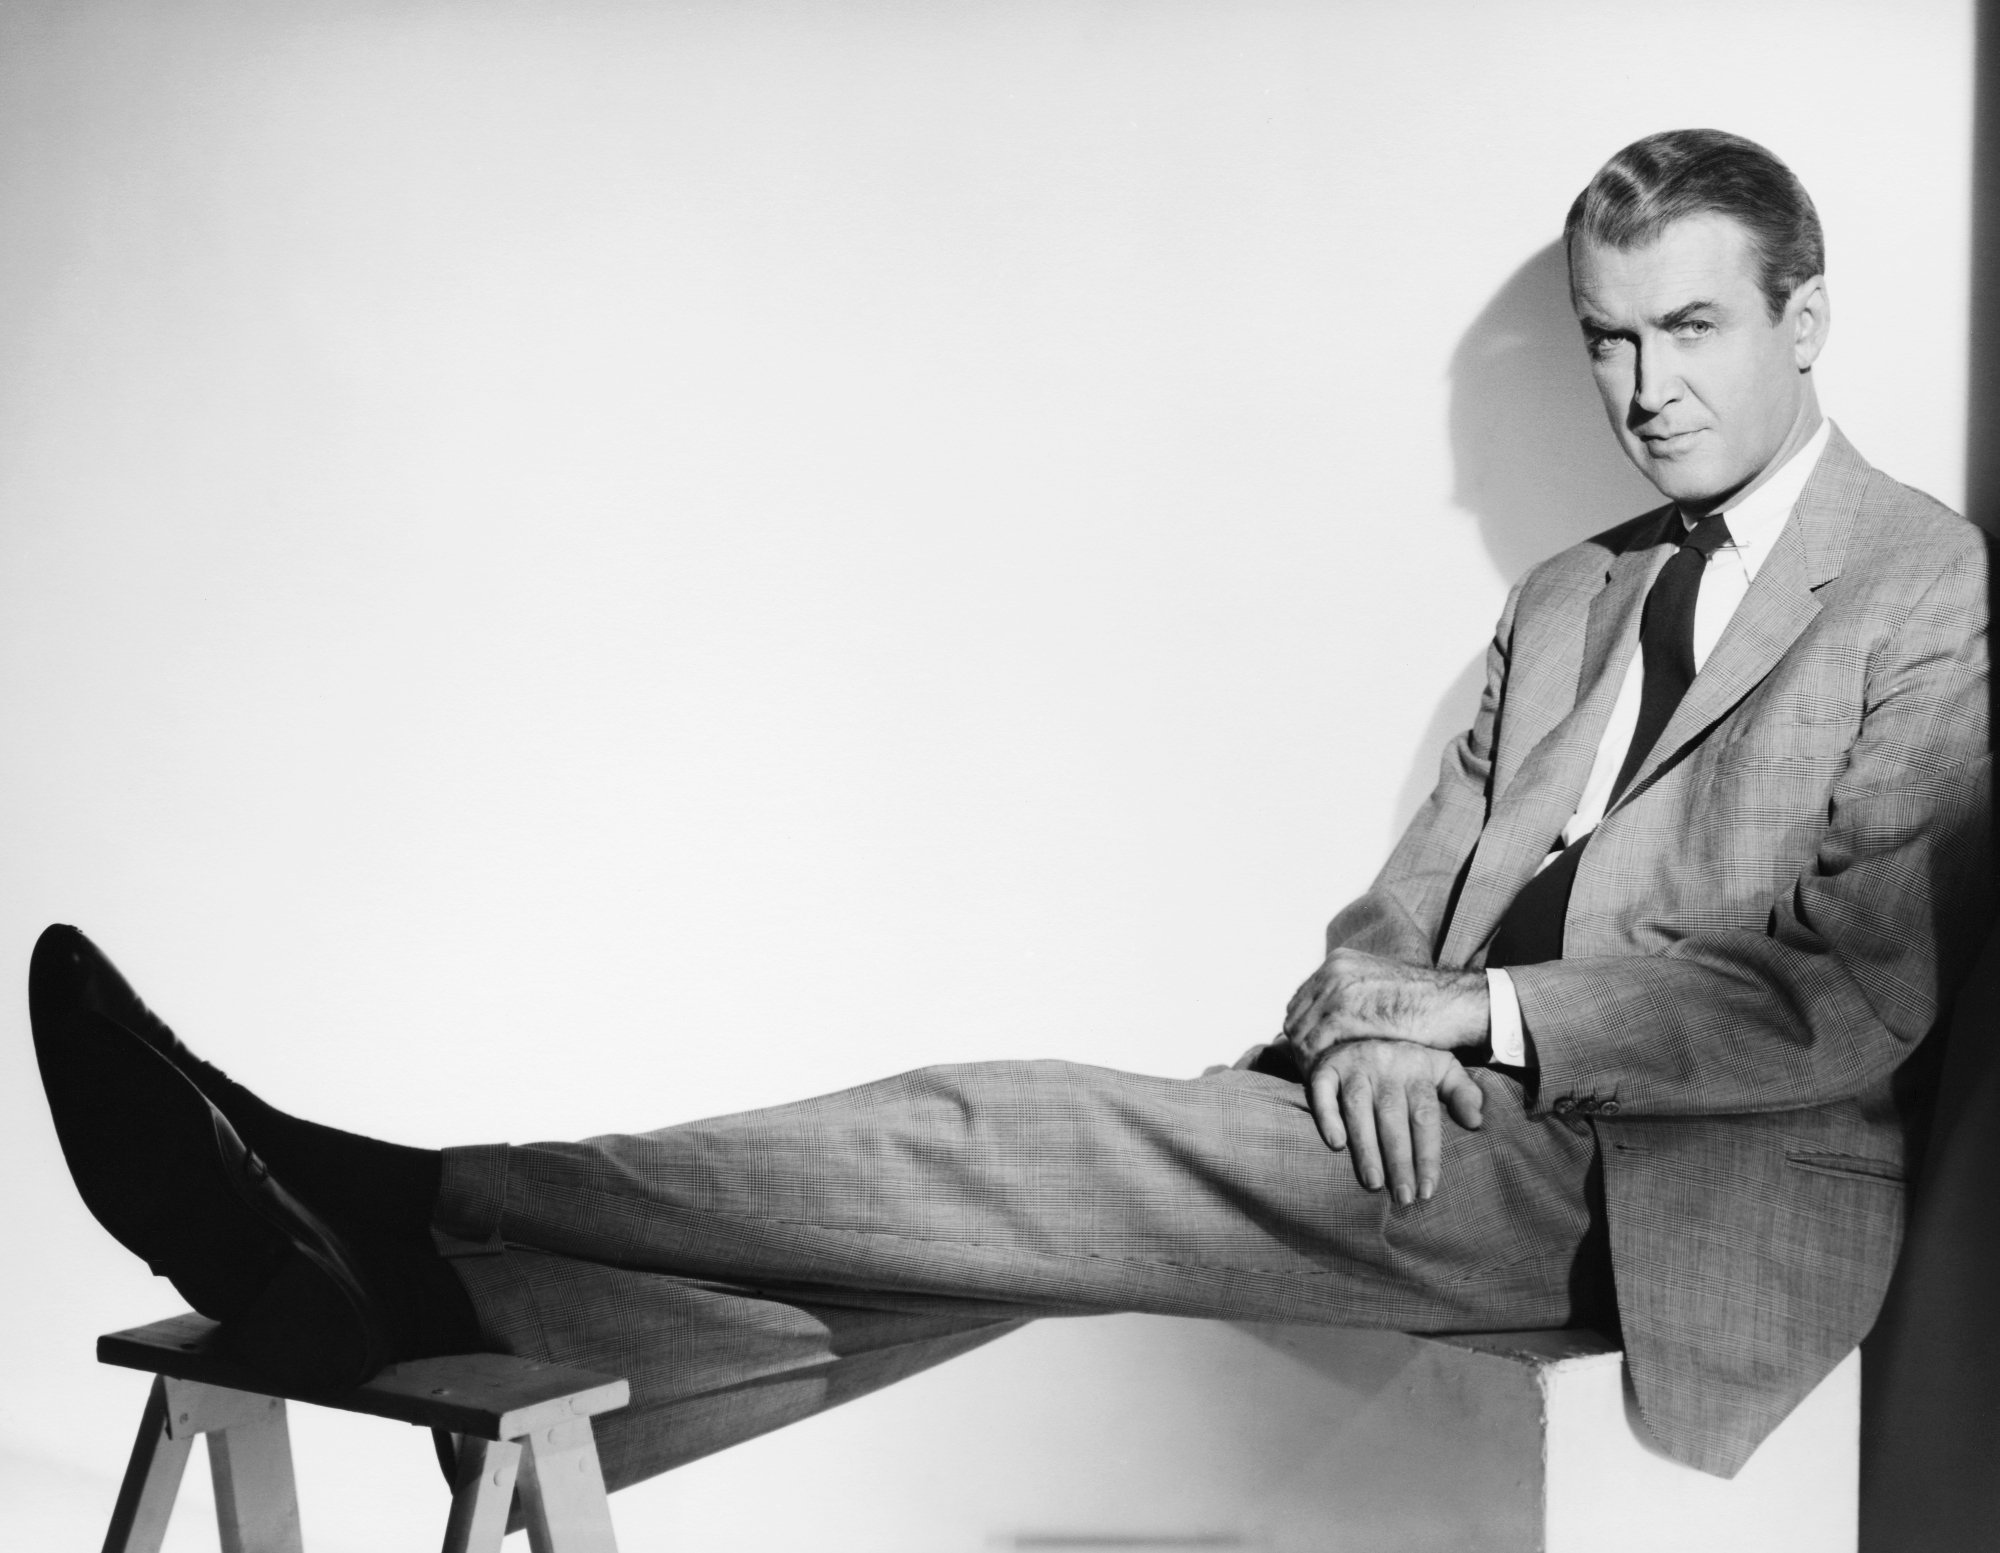 Jimmy Stewart, who spoke his last words about his late wife. He's wearing a suit and tie and resting his feet on a stool